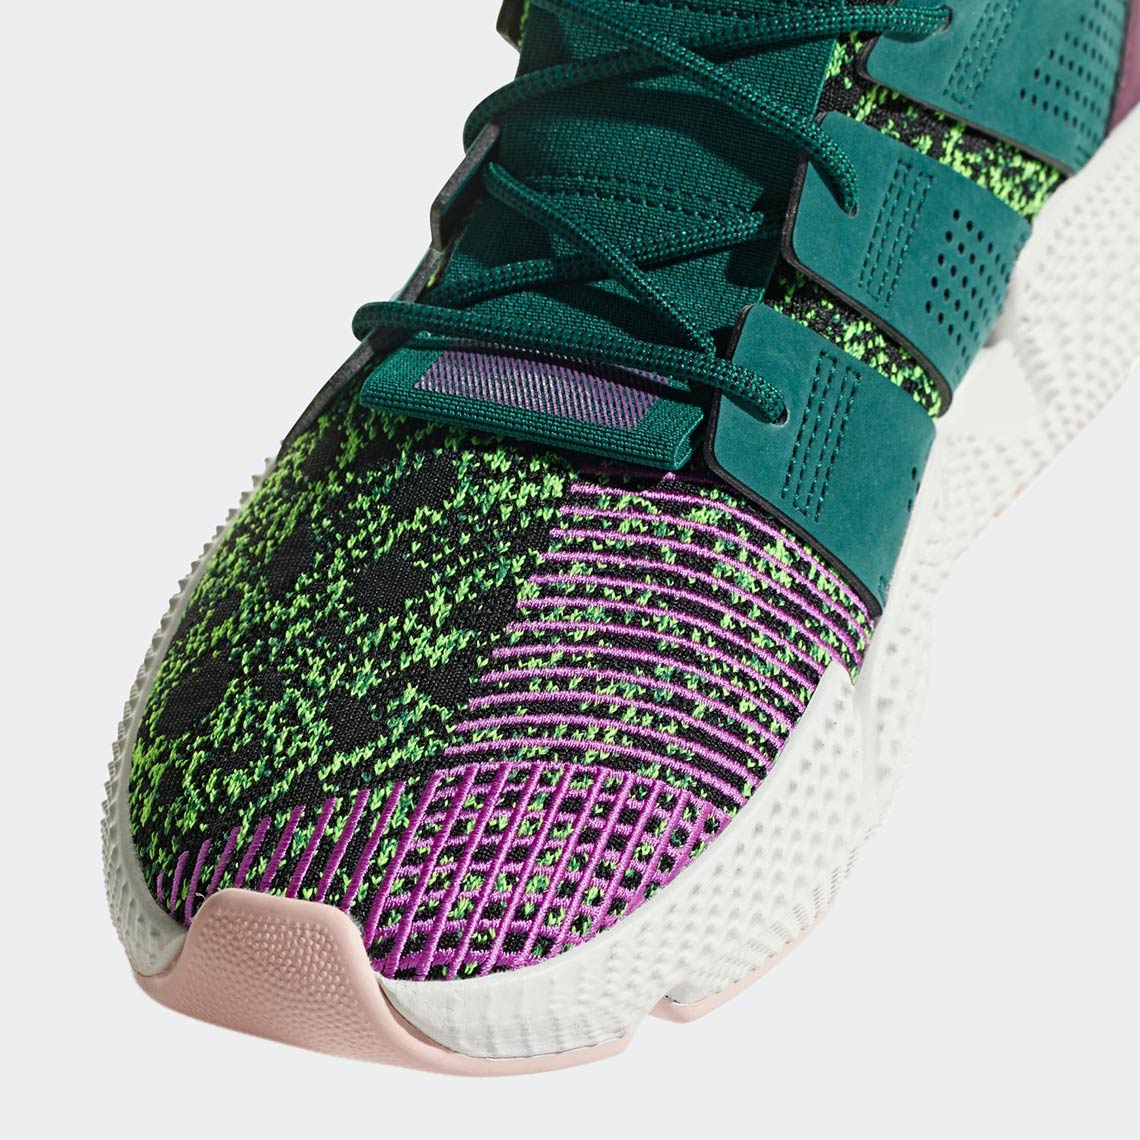 Dragonball Z x adidas Consortium Prophere Cell-7